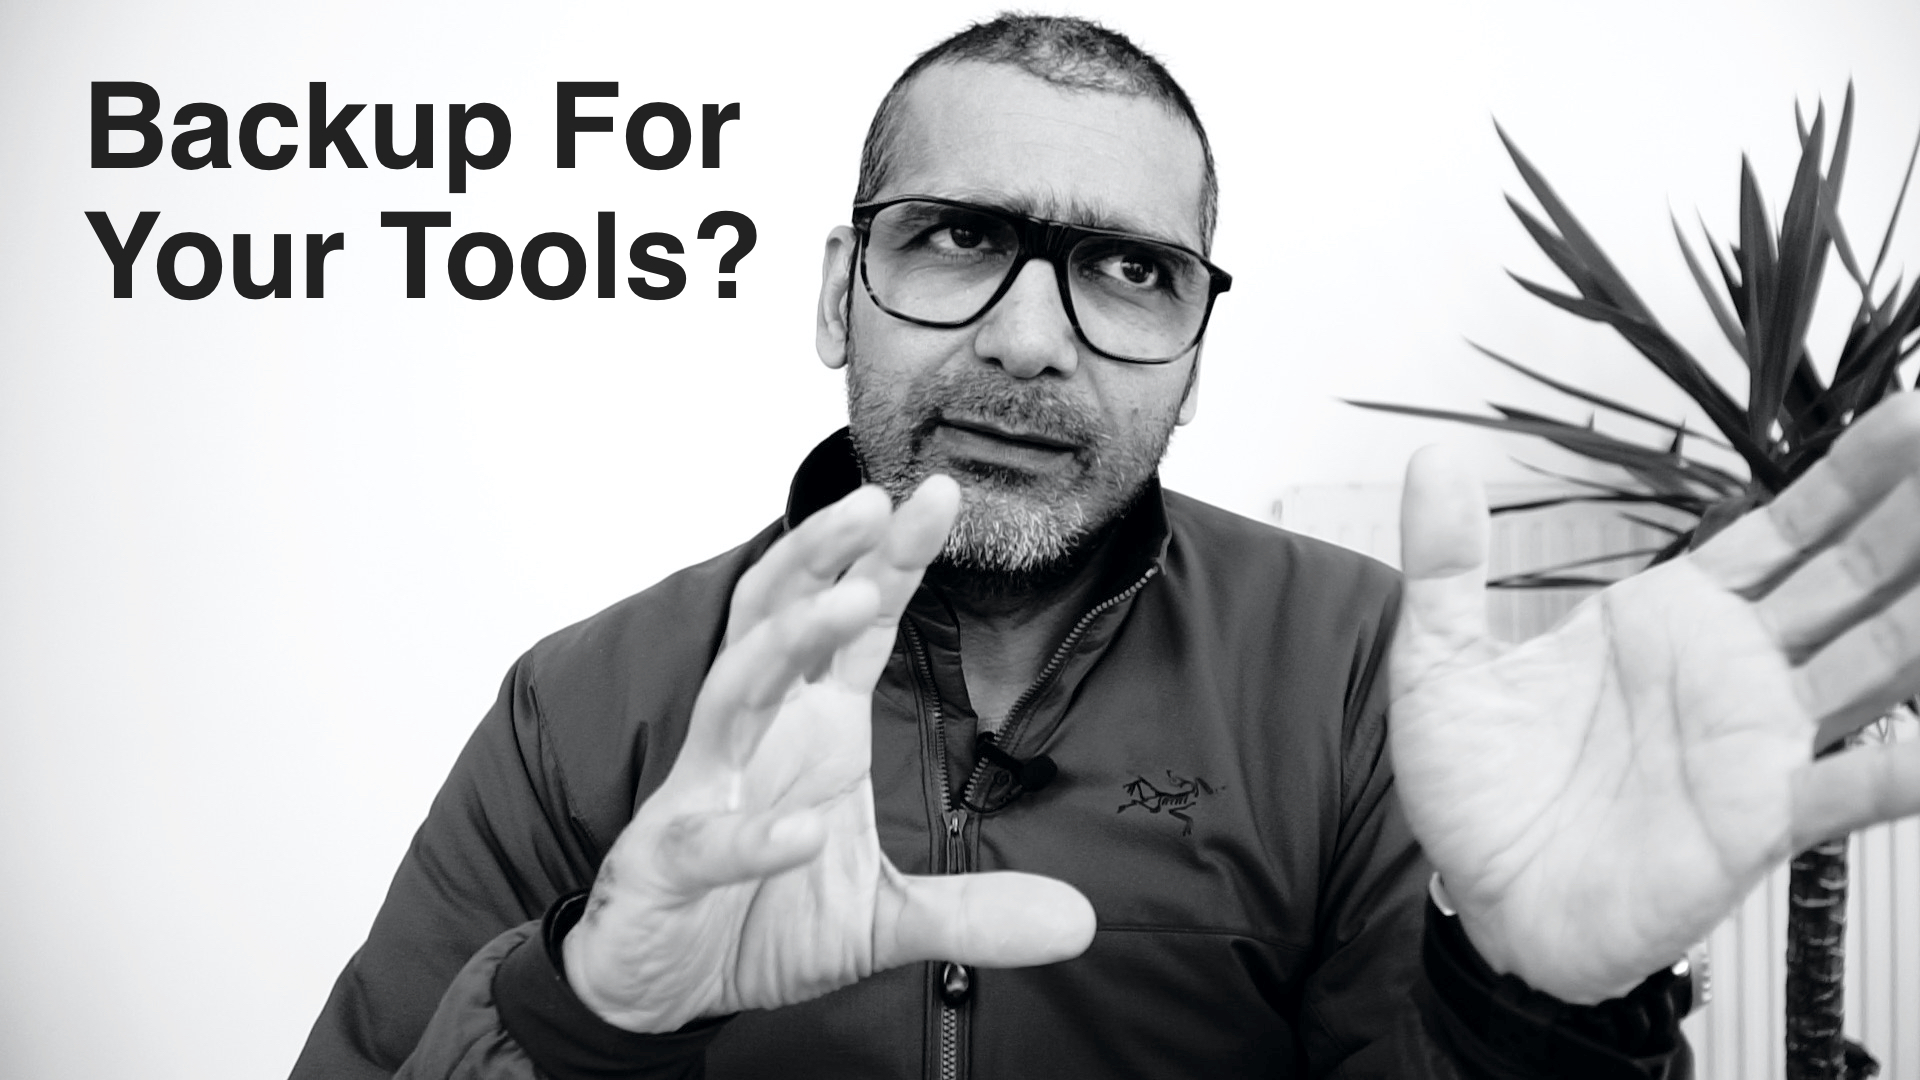 Do you have backup tools?